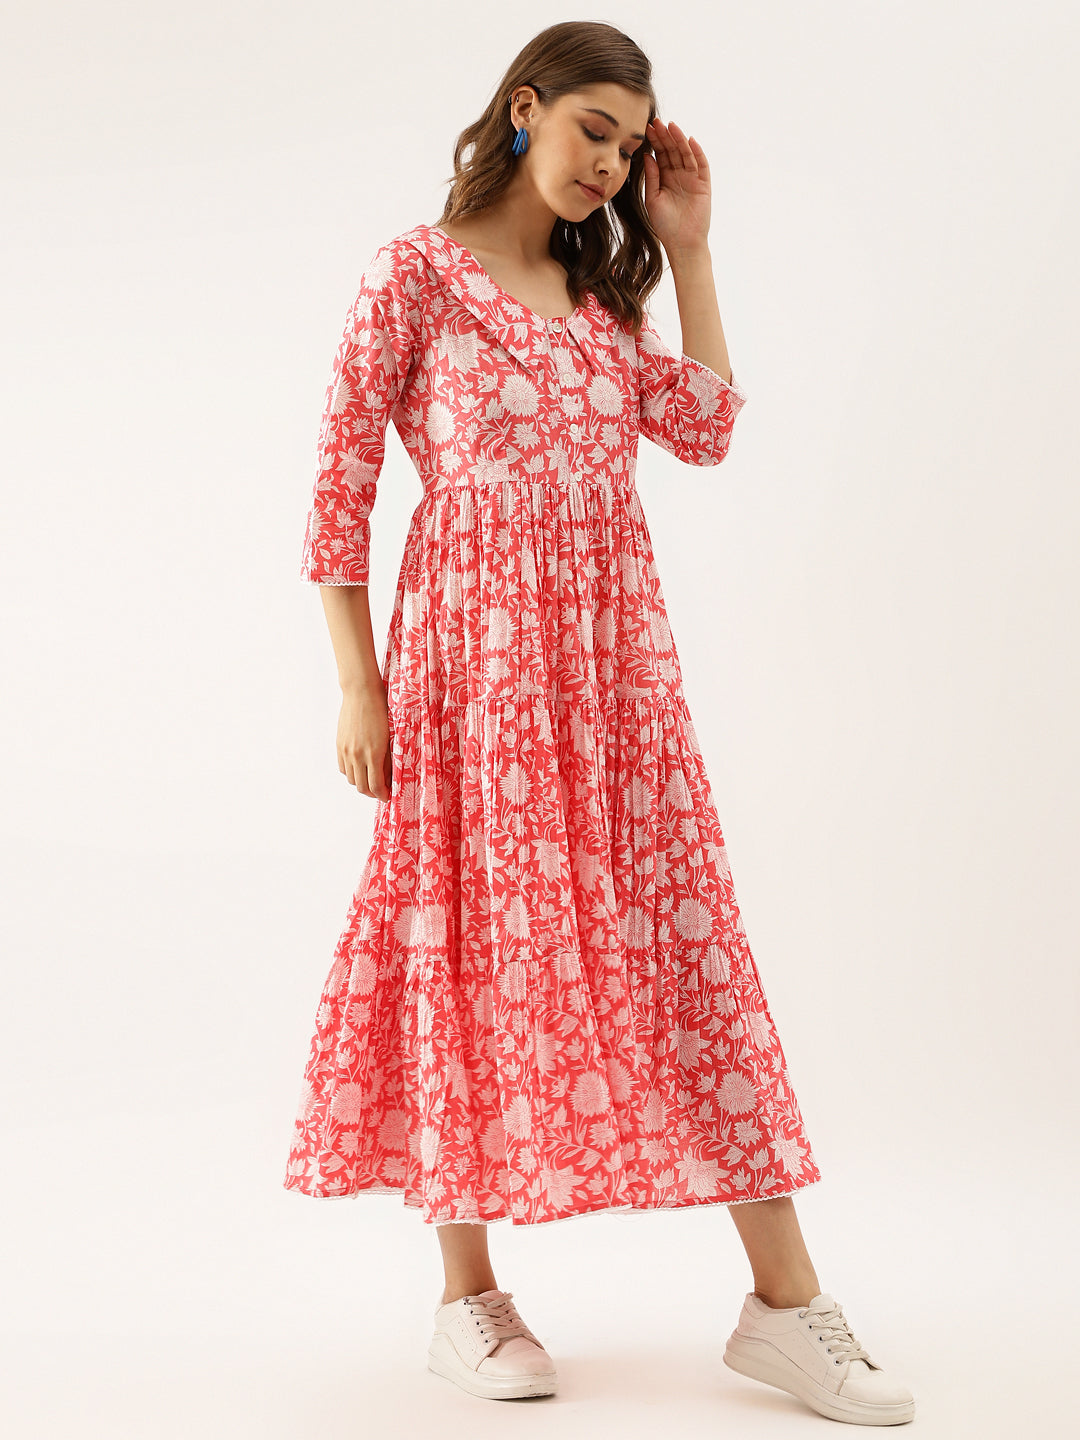 Divena Pink Floral Printed Cotton Ethnic Dress for Women